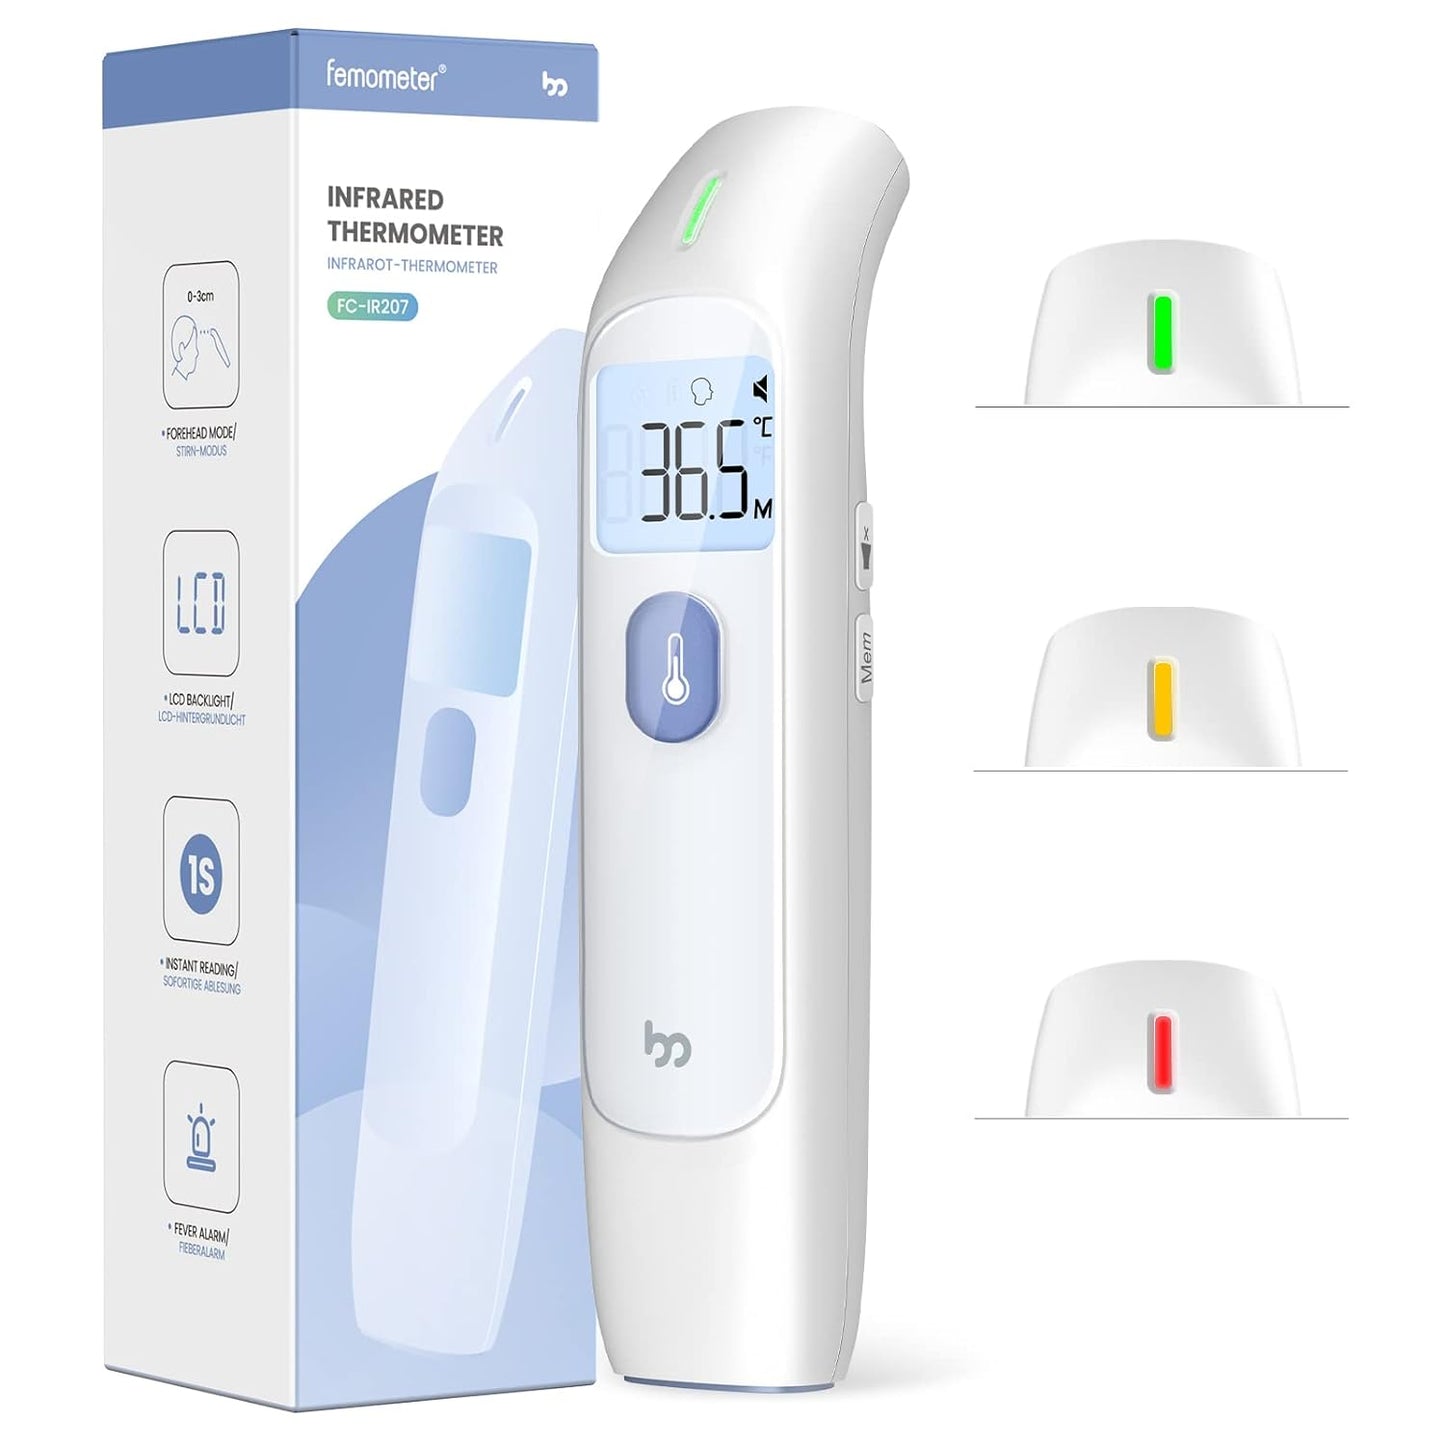 Non-Contact Infrared Thermometer for Adults and Children, Digital Thermometer 2-in-1 Forehead Thermometer, Accurate, Fast Readings, Fever Alarm, Memory Recall with Accurate Time, White